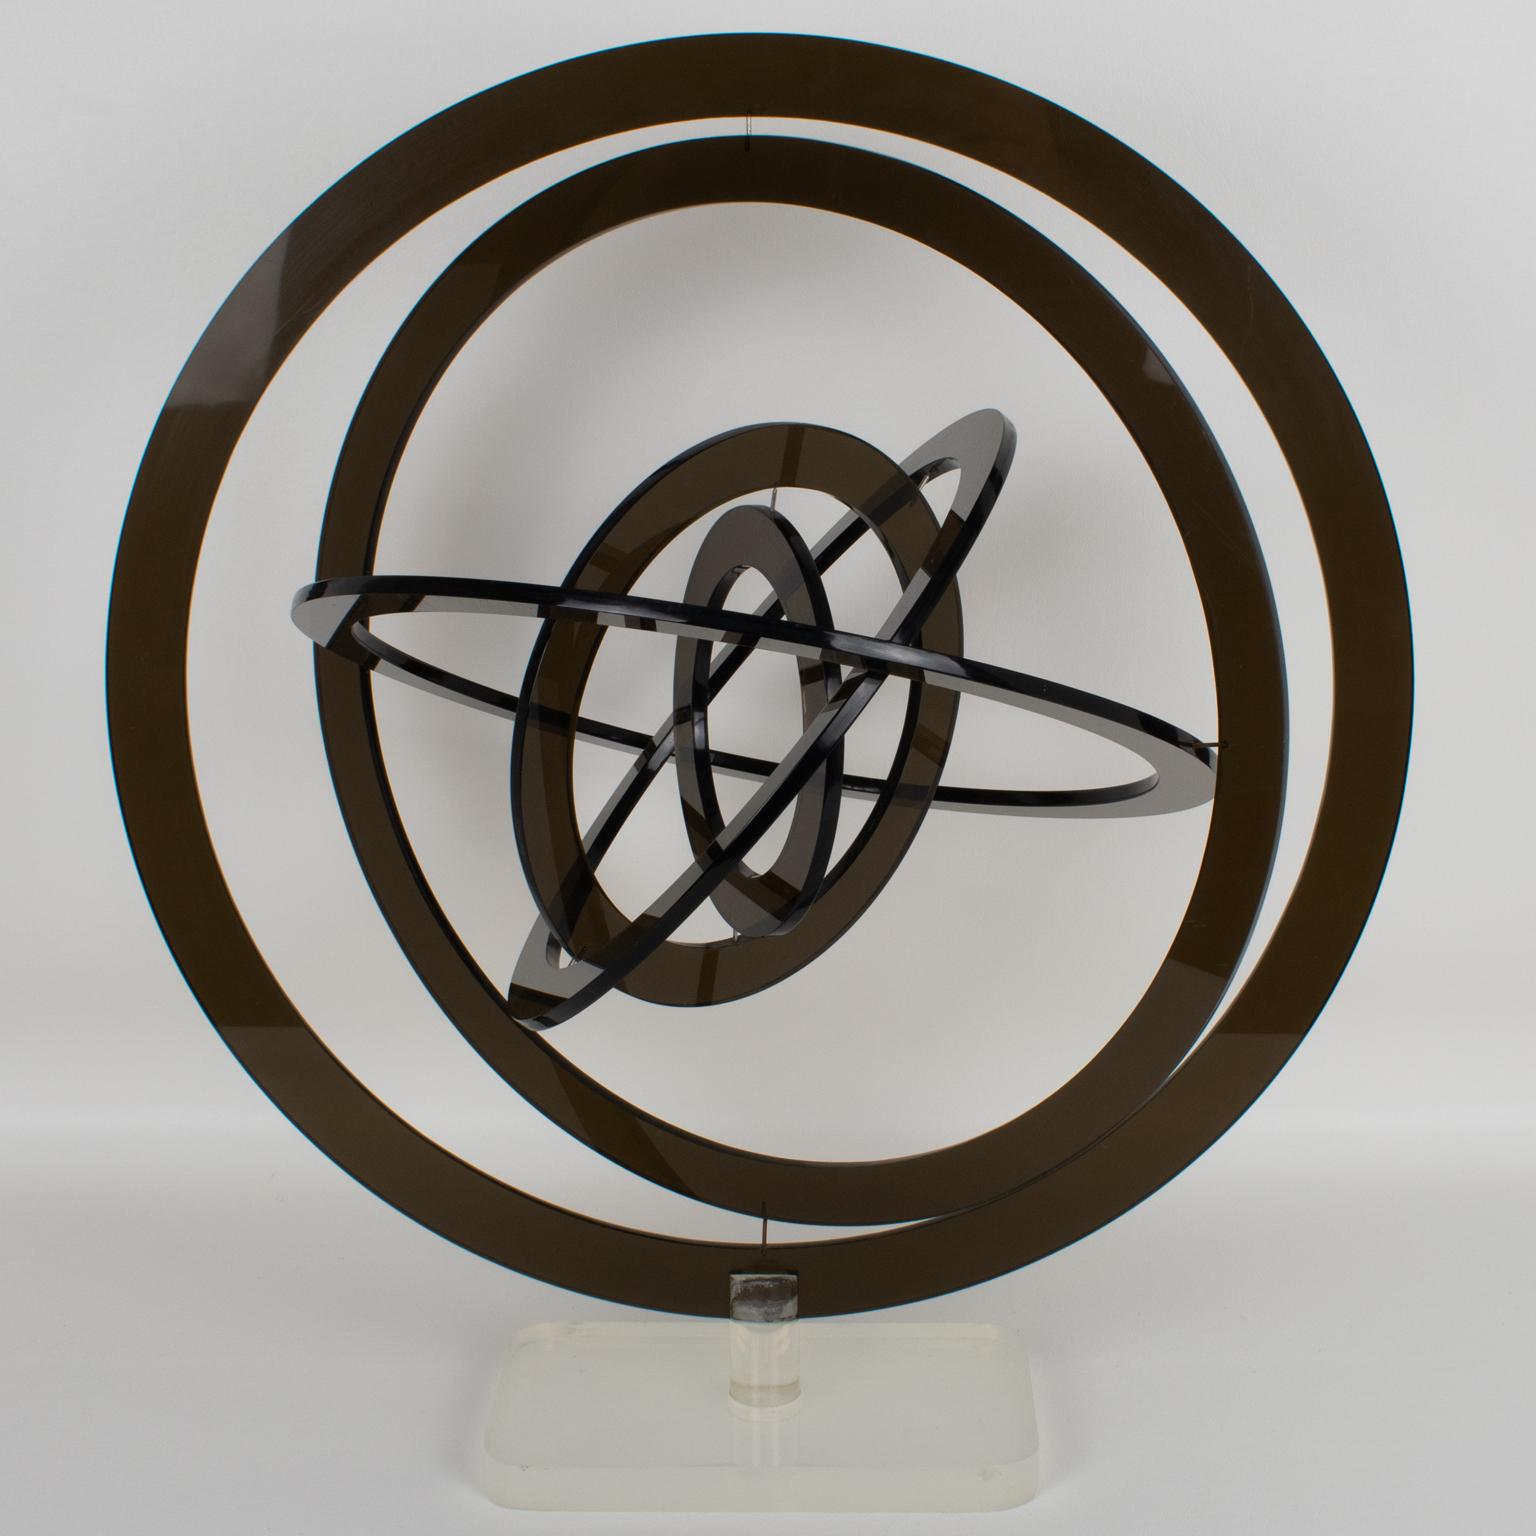 This stunning rotating kinetic sculpture was crafted in Italy in the 1970s. The six circles are made of Lucite in a smoke gray color and stand on a frosted clear Lucite base. The six concentric circles that constitute this astrolabe pivot on a